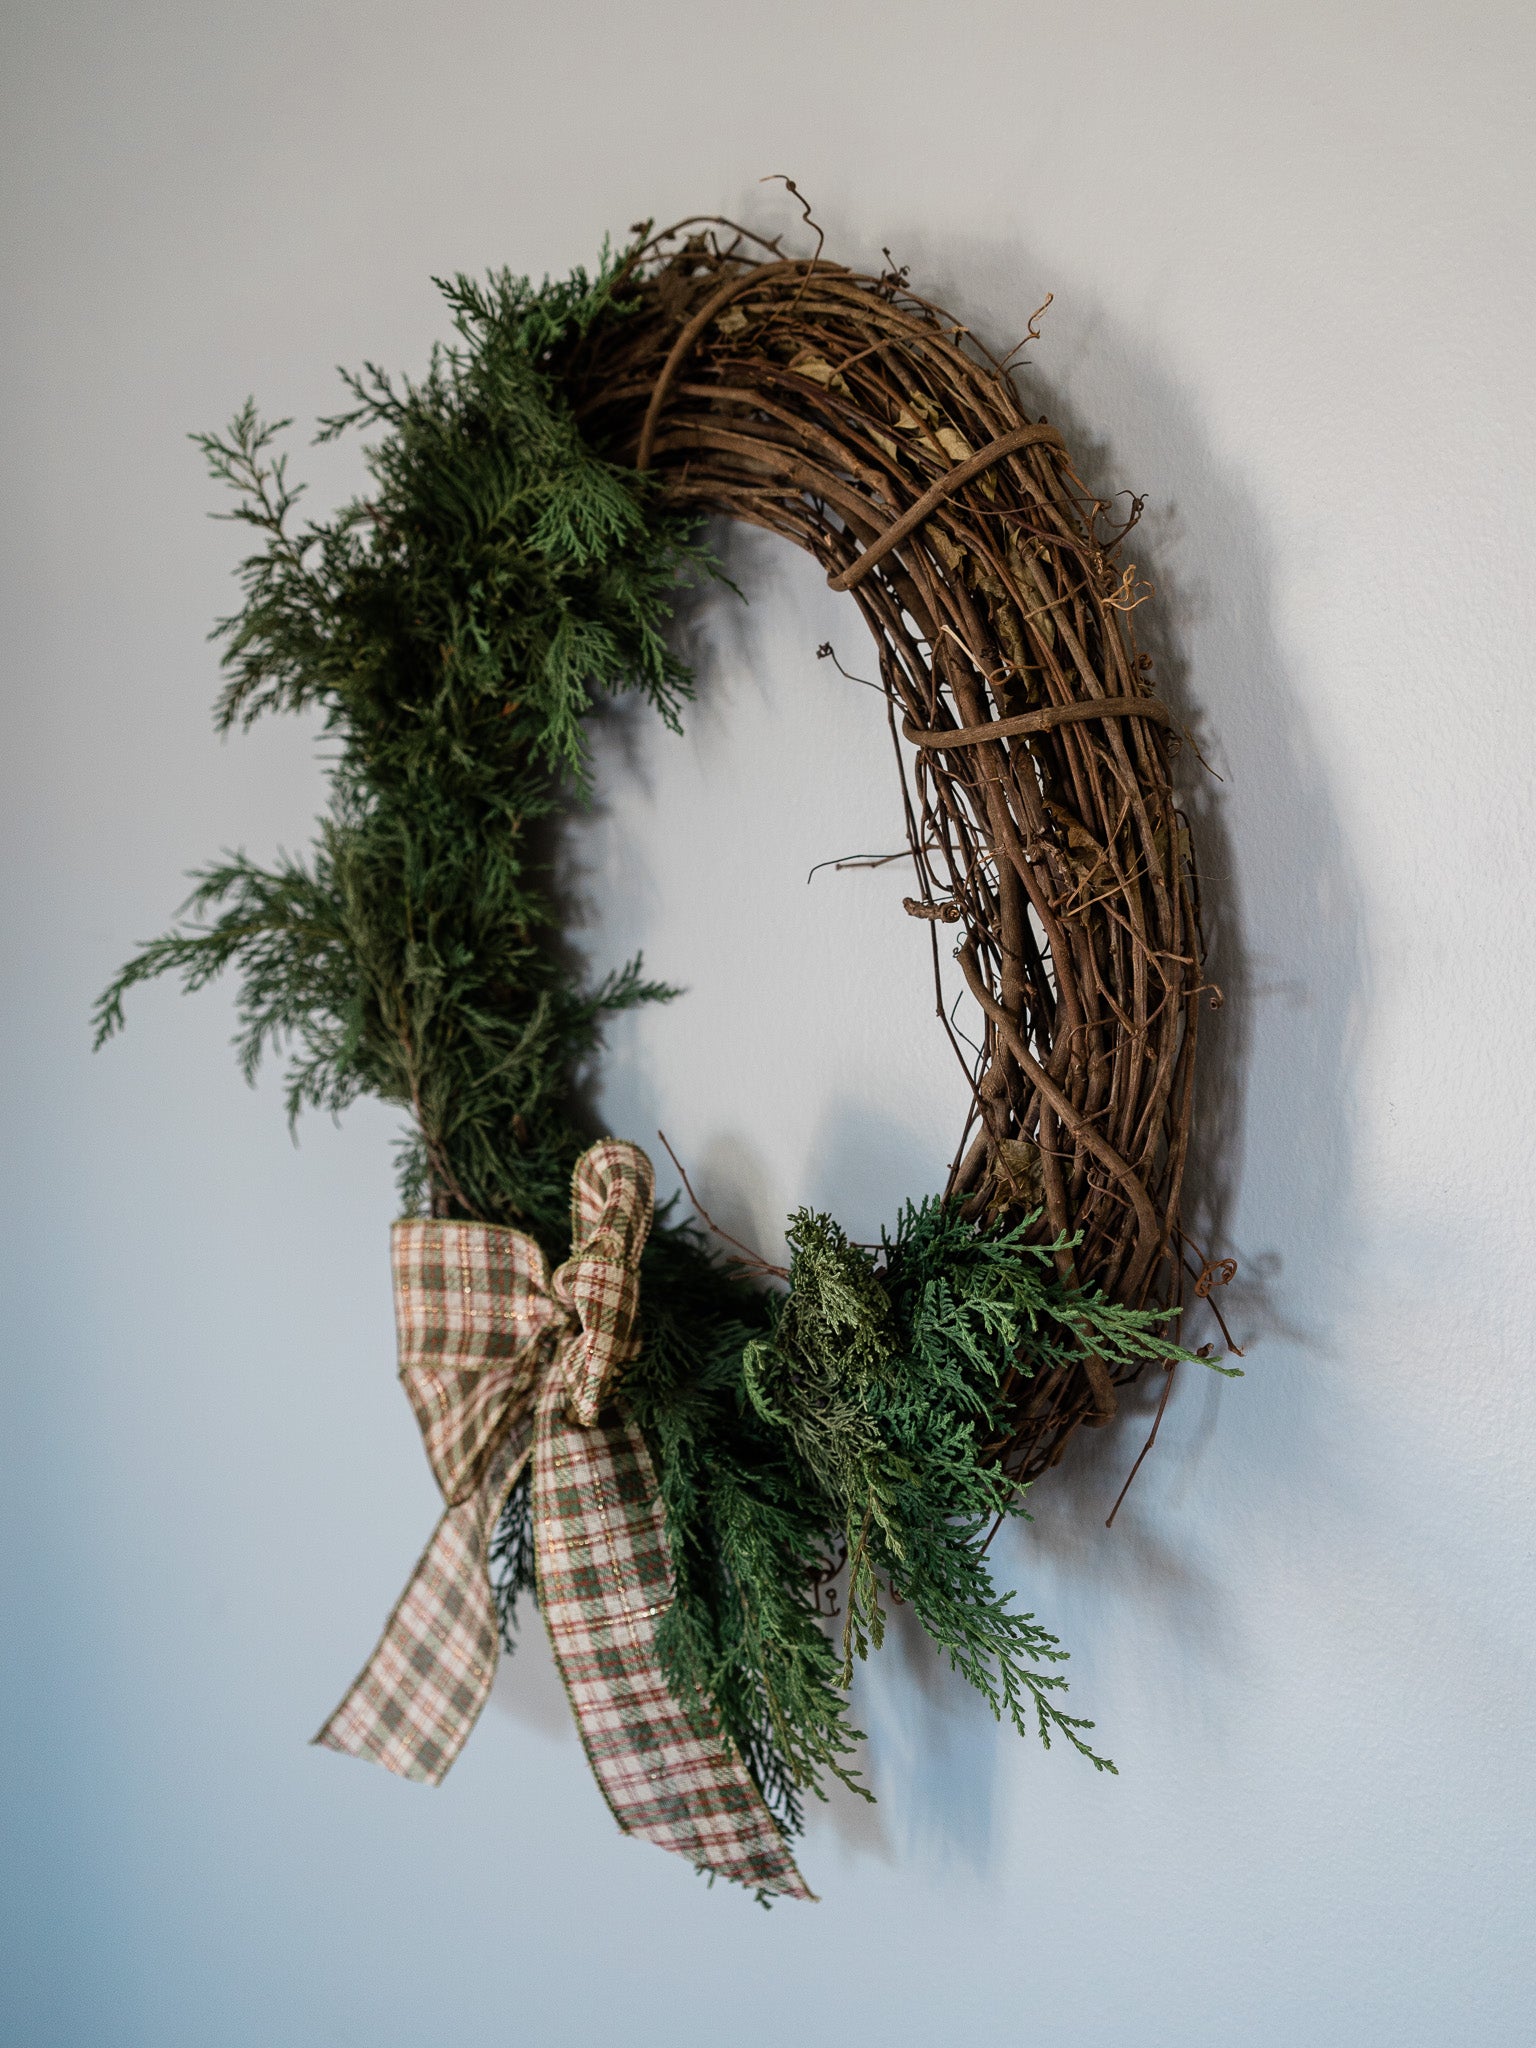 Holiday Wreath Workshop Tuesday, November 28th 6pm-7:30pm